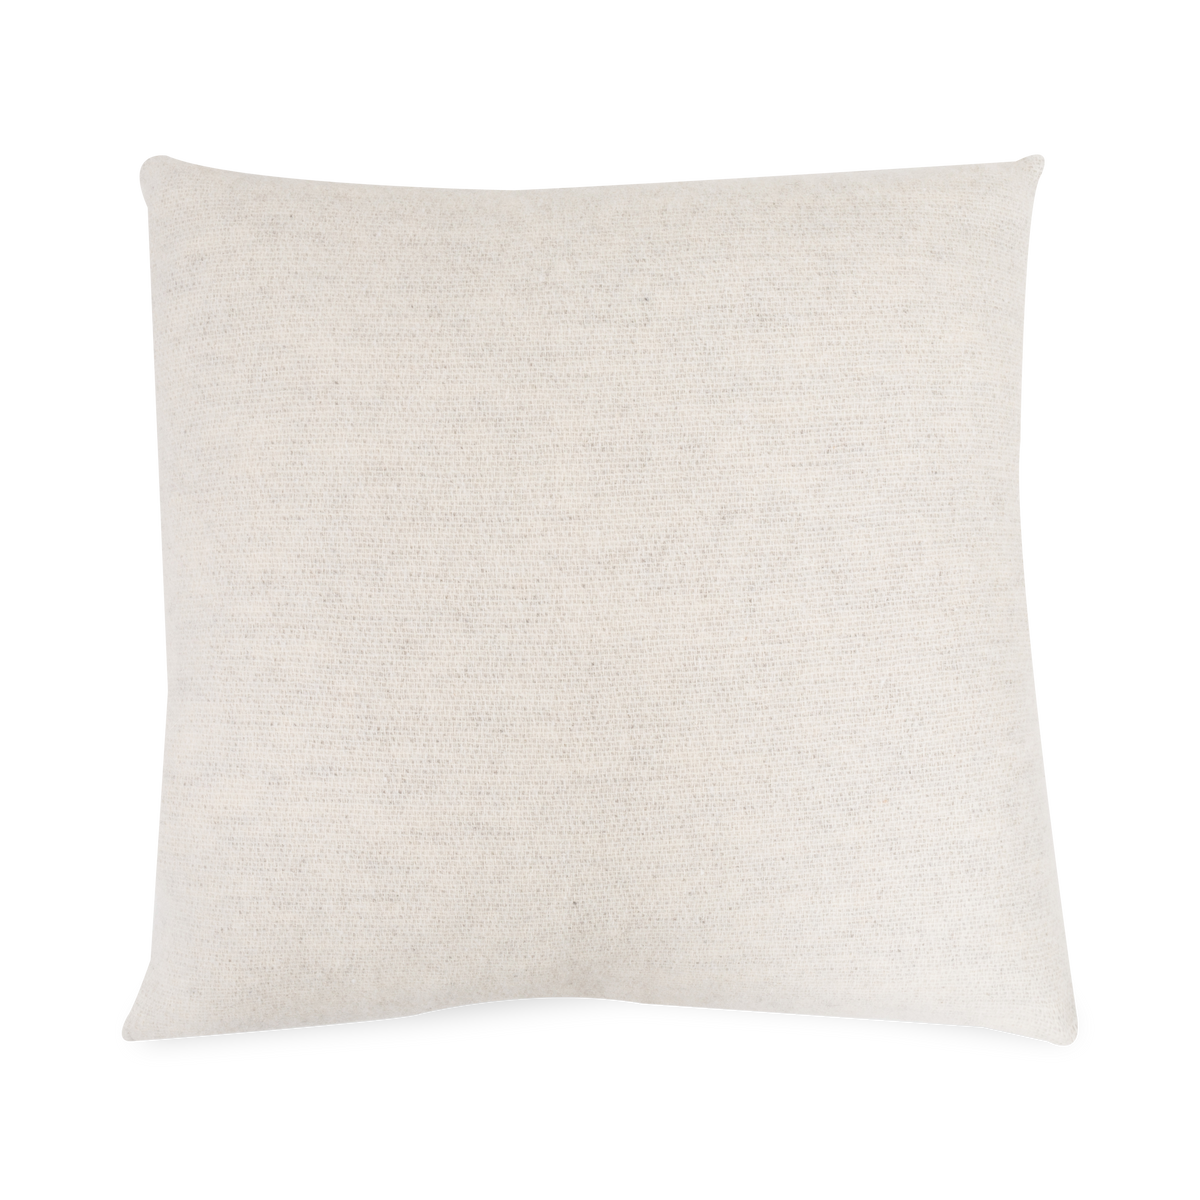 Inherently versatile, the Double Sided Pillow can be used on both sides, featuring two neutral palettes and an elegantly textured New Zealand wool.